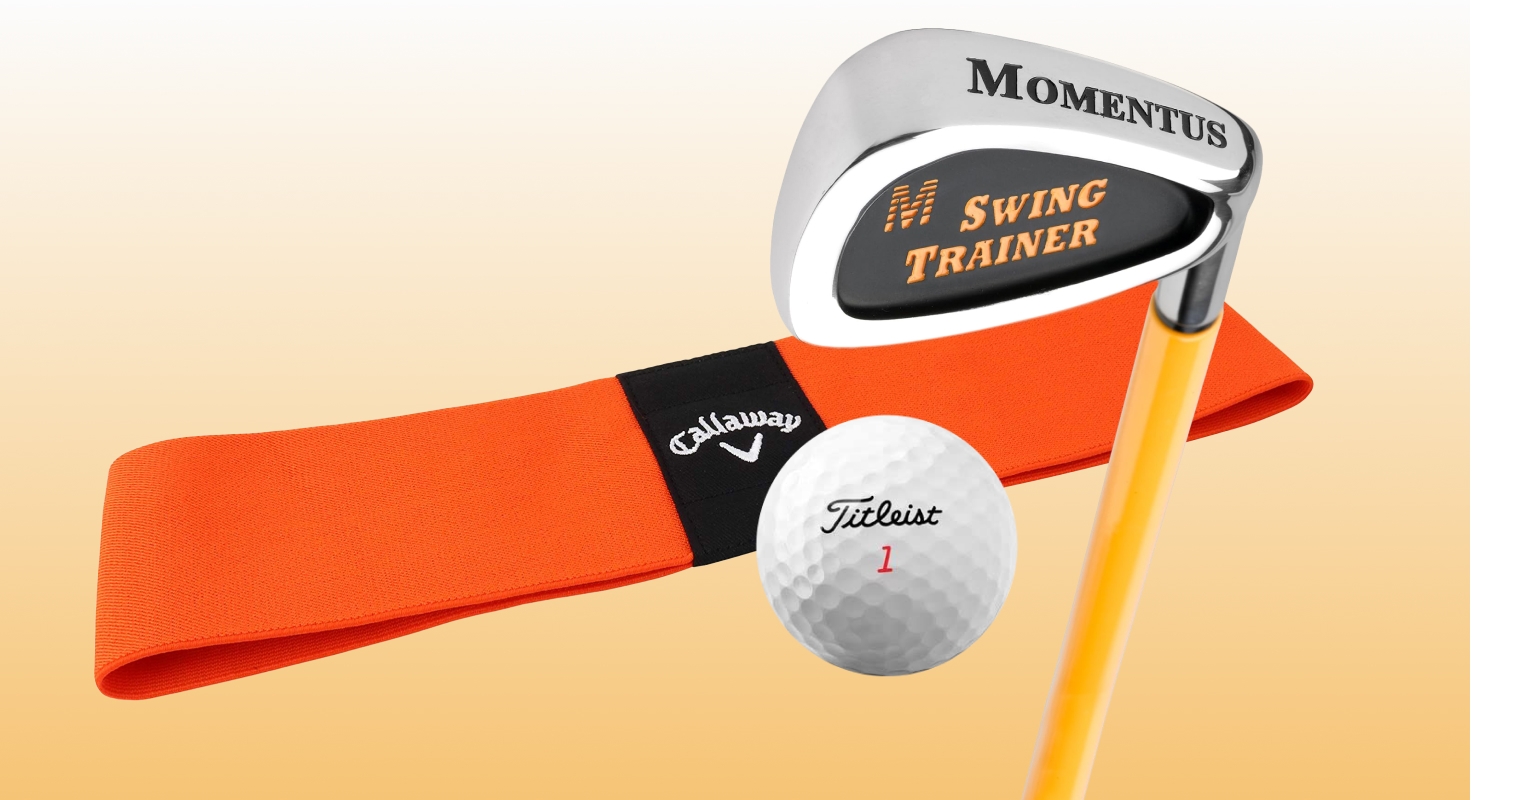 A better swing starts here image